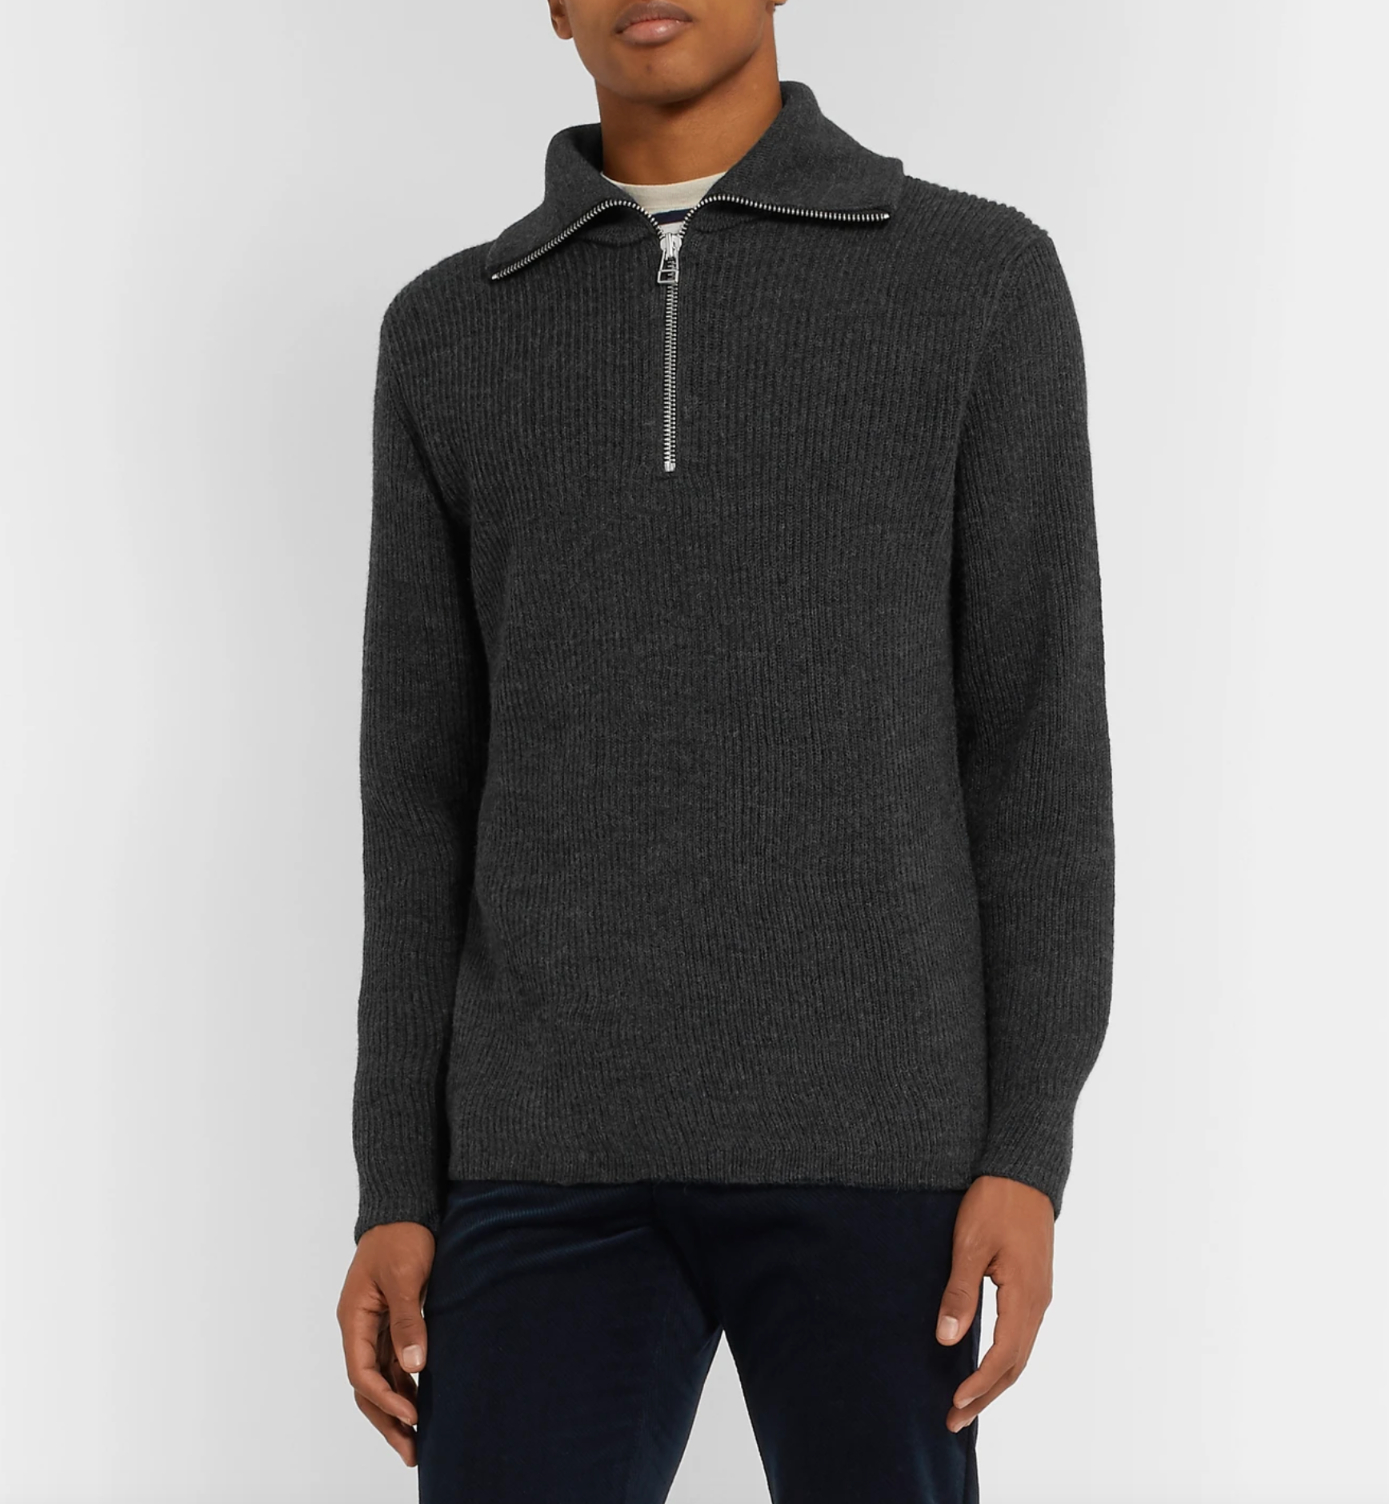 The Best Half-Zip Sweaters for Men + How to Style Them | Albert Review